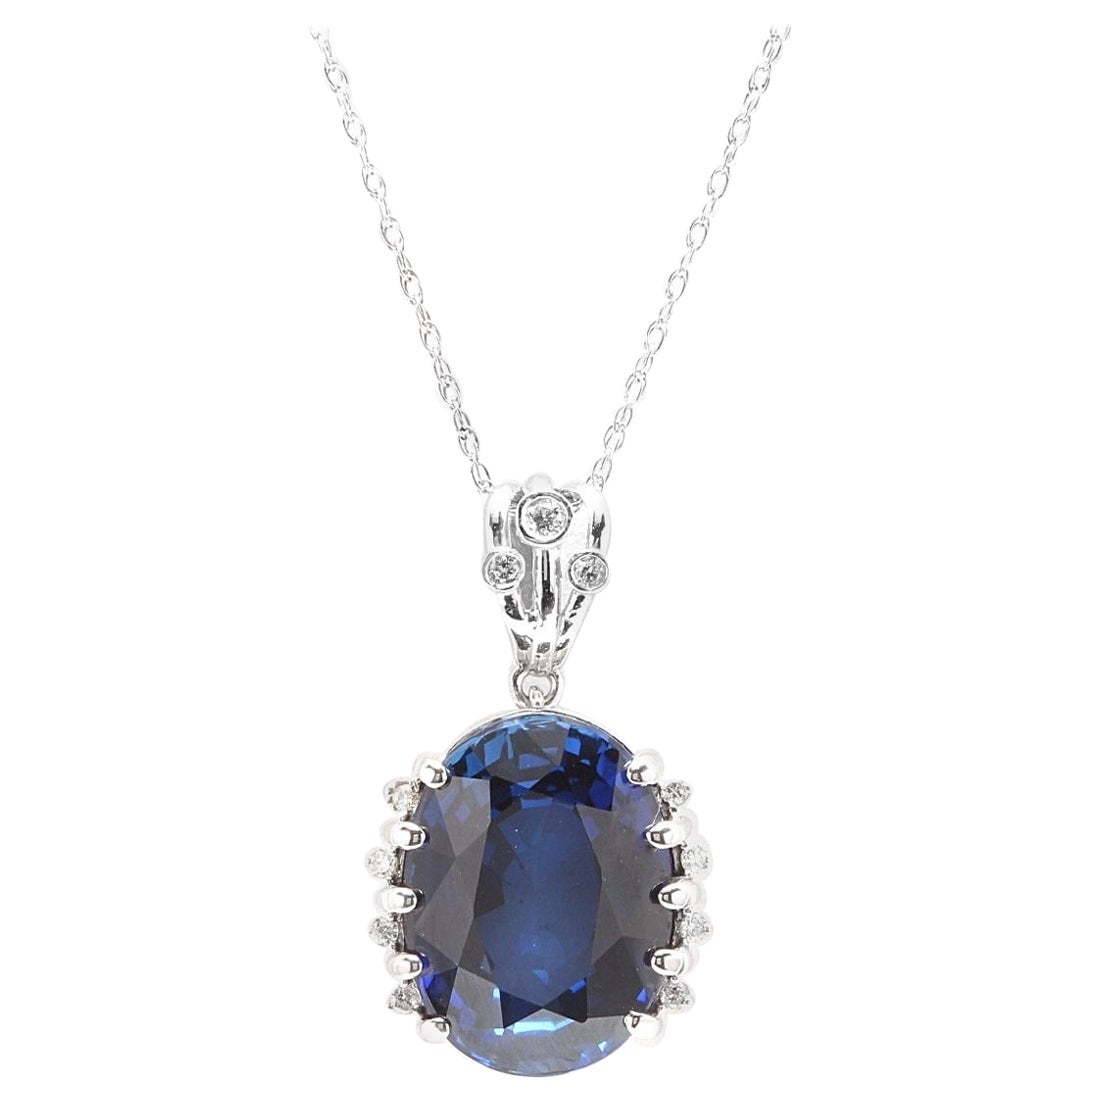 13.20Ct Lab Created Sapphire and Diamond 14K Solid White Gold Necklace (Collier en or blanc massif)